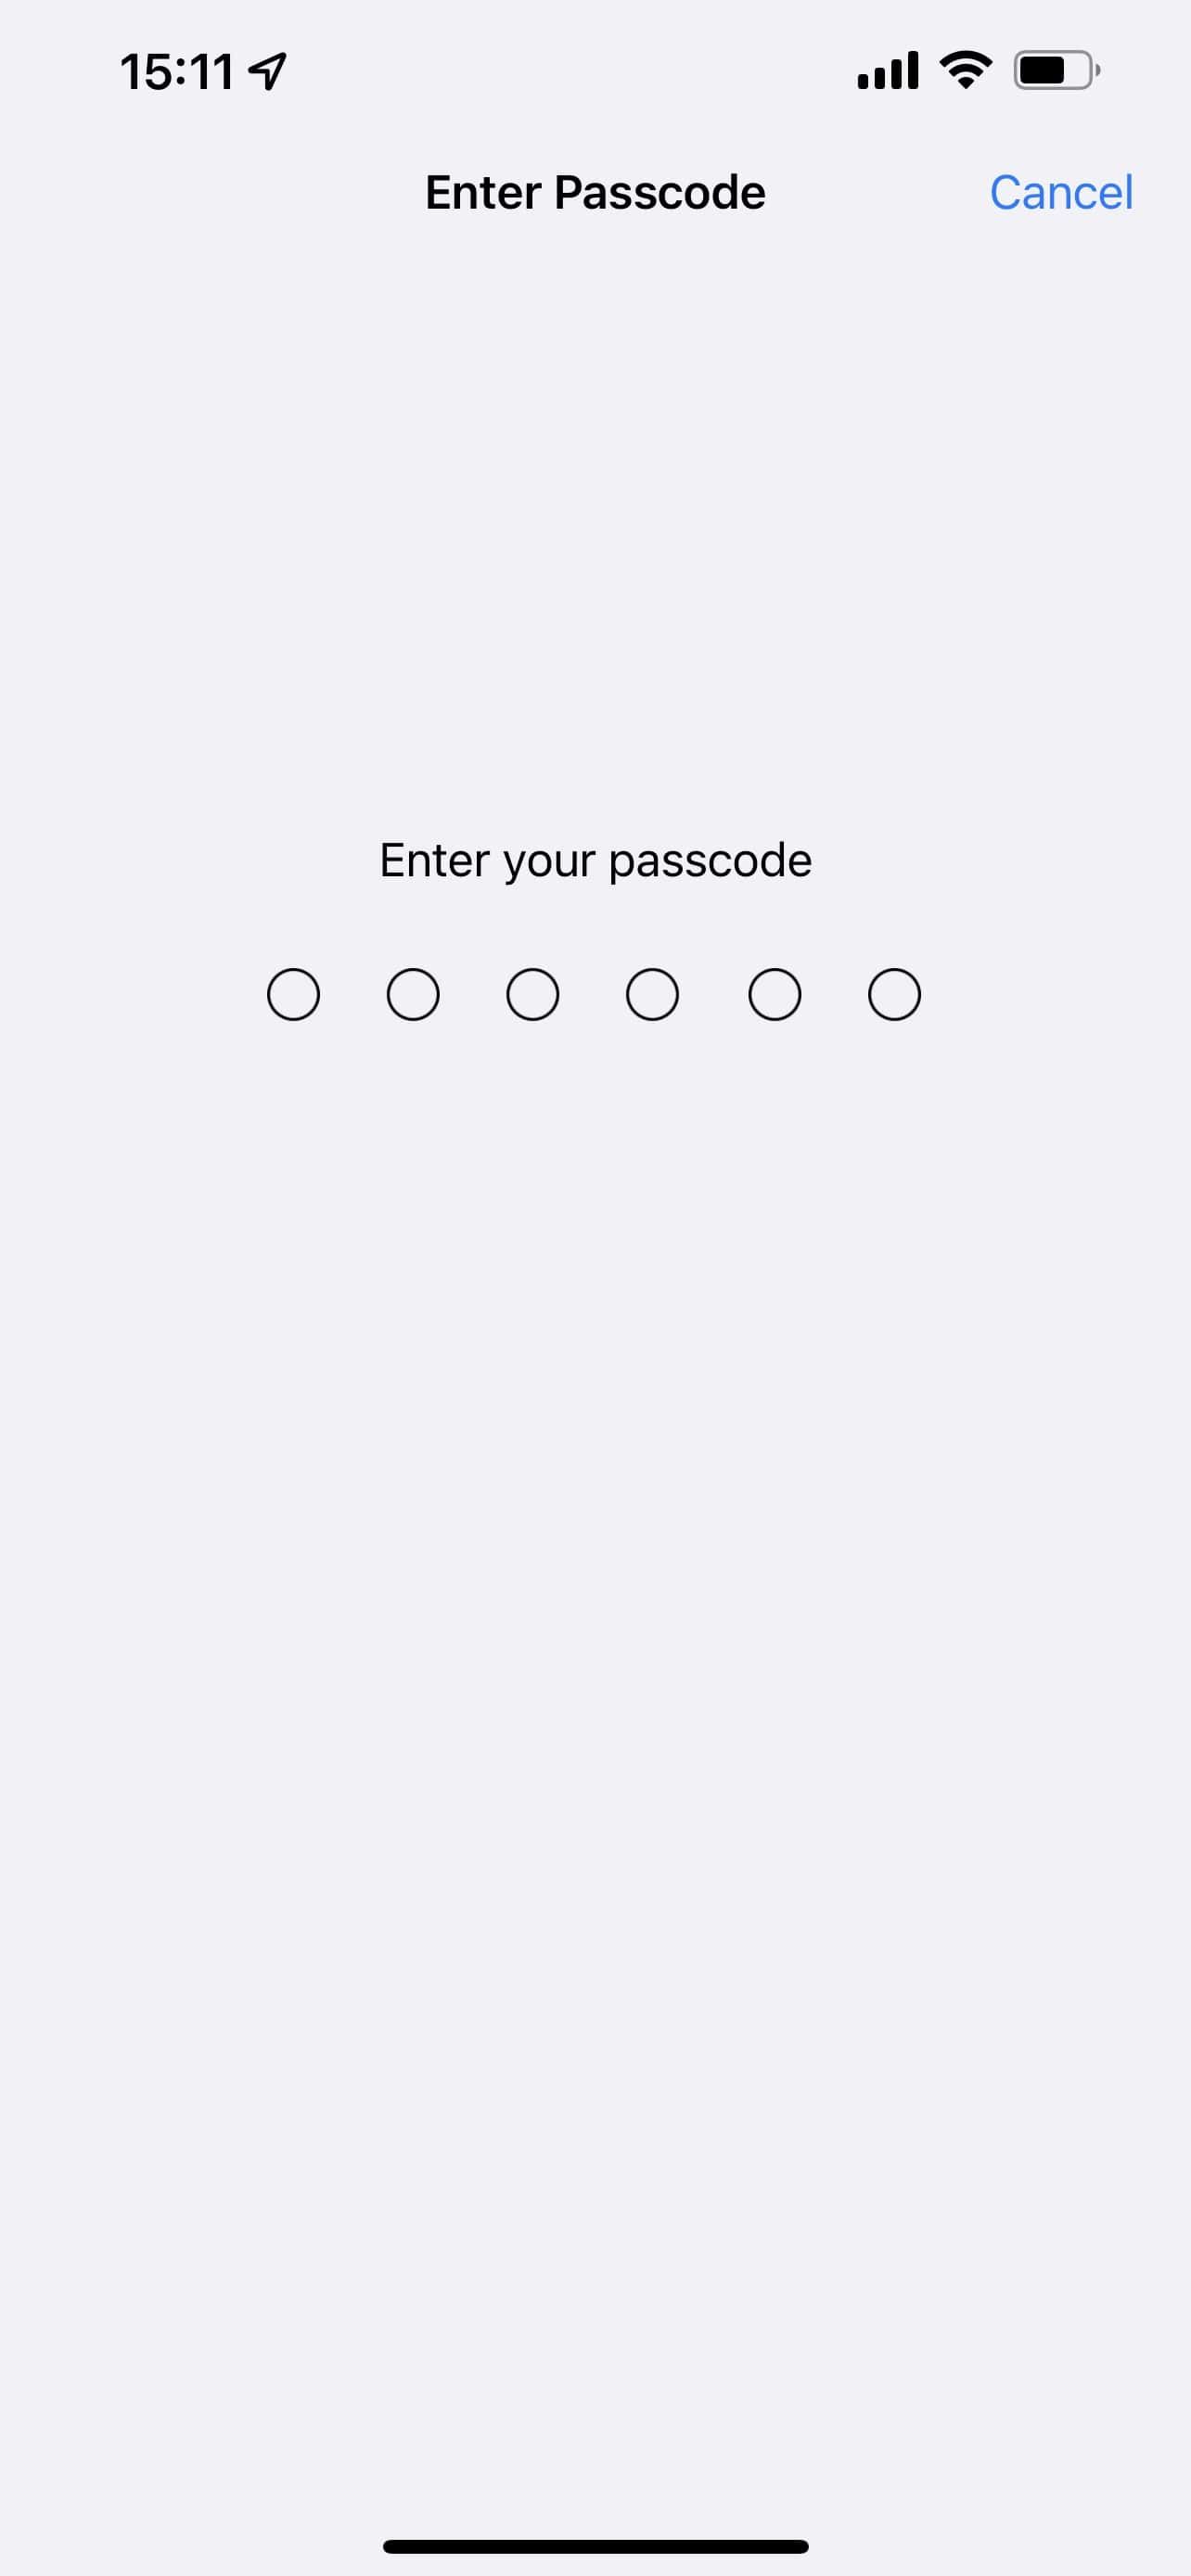 Enter Your Passcode